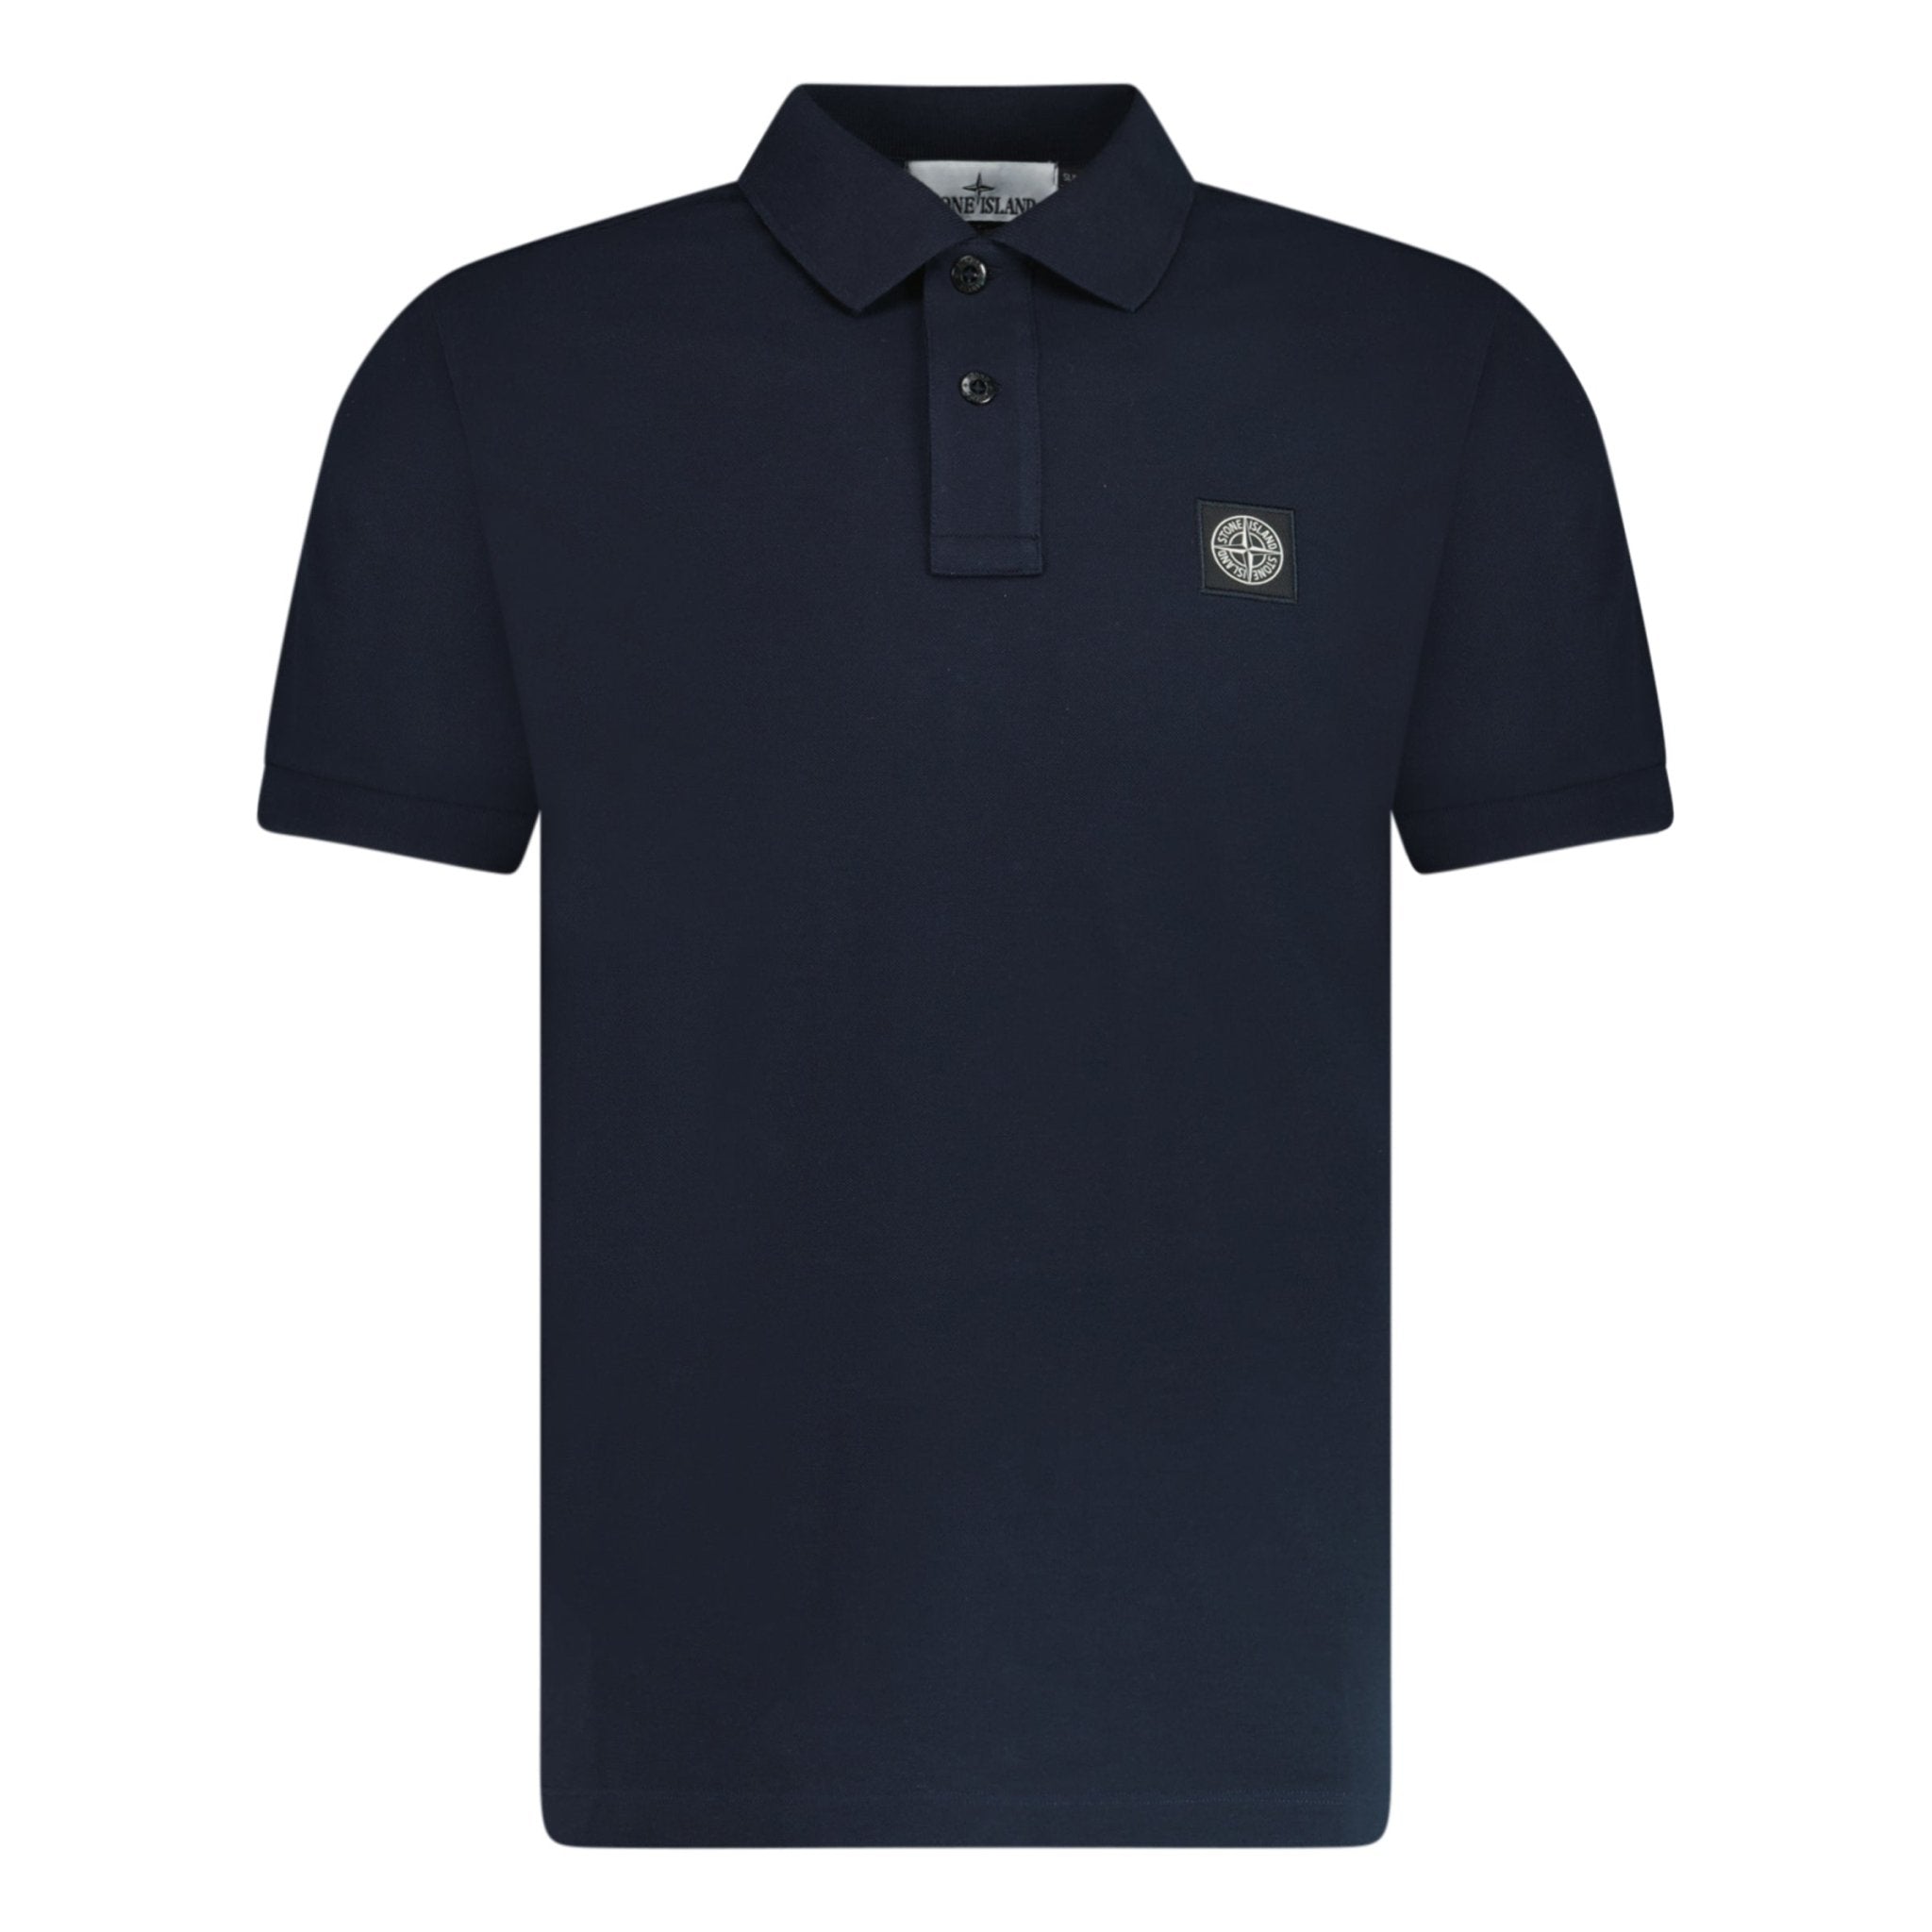 Stone Island Patch Polo T-Shirt Slim Fit Navy